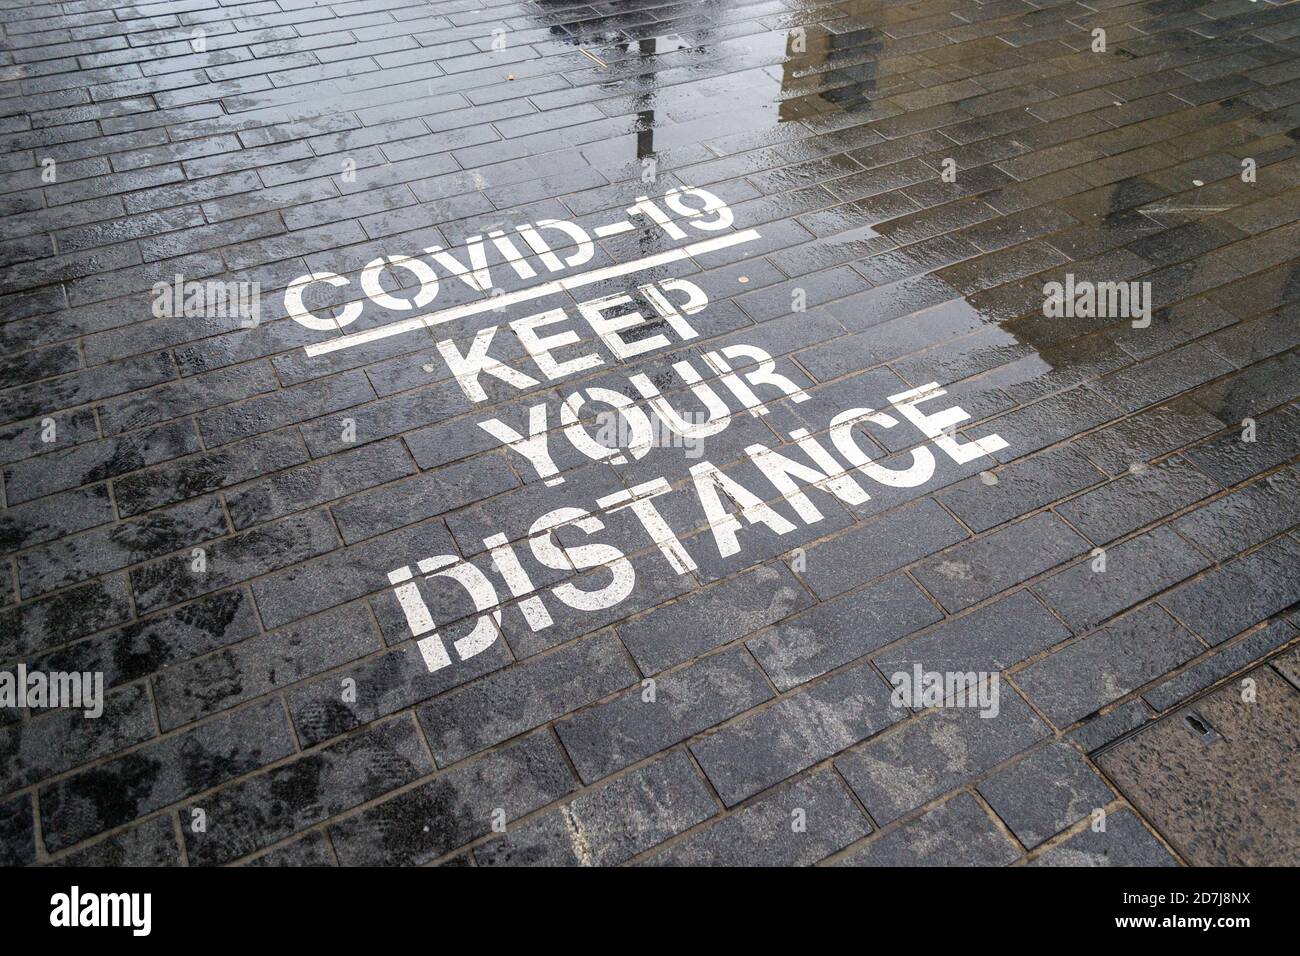 Covid-19 Keep Your Distance stenciled Road sign, Social Distancing, Birmingham, UK Stockfoto